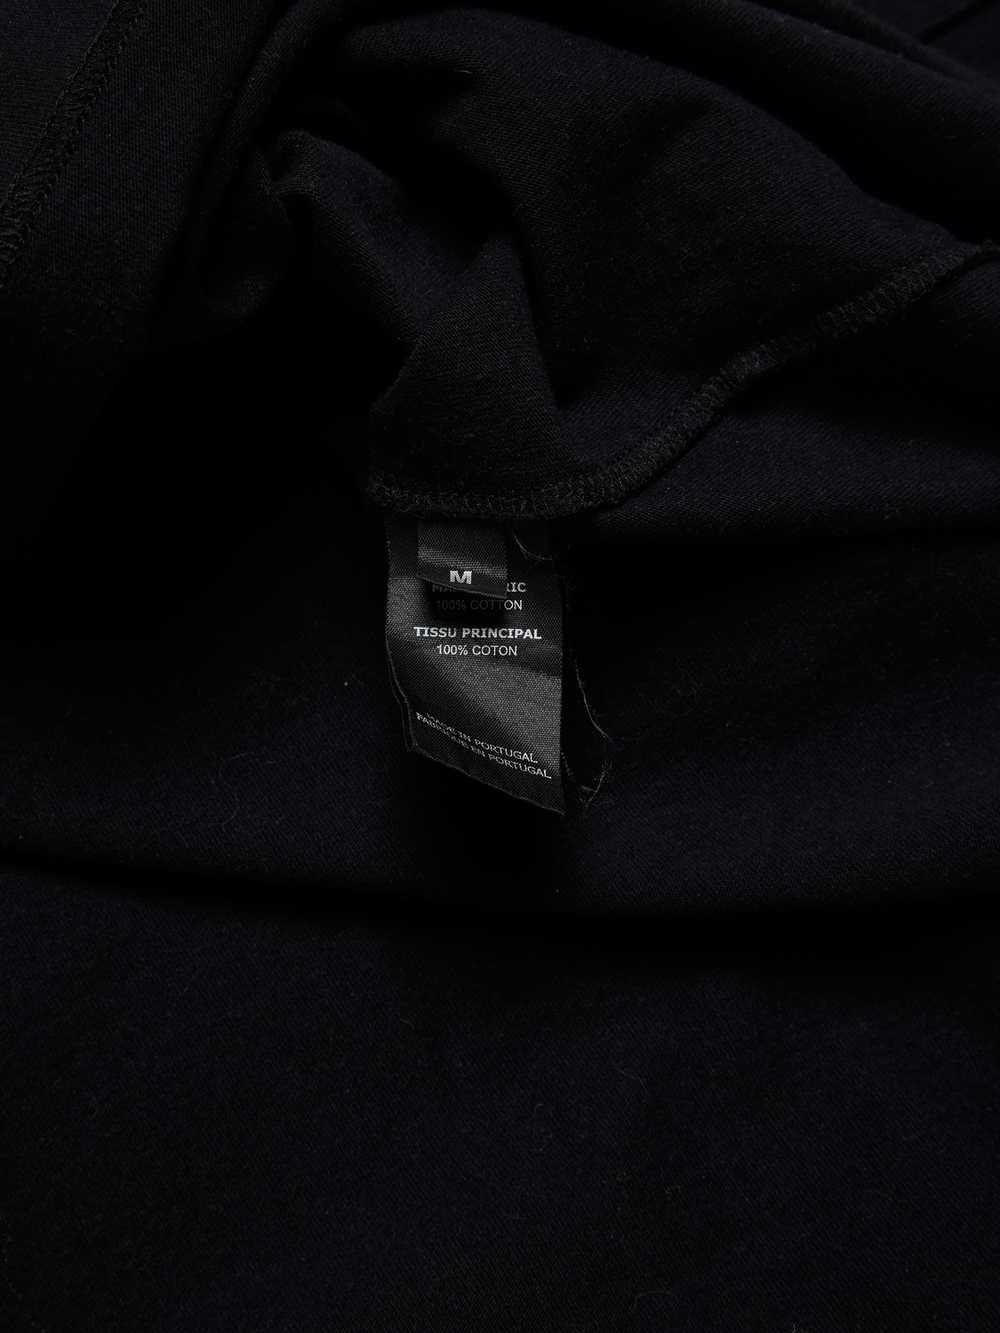 Vetements AW20 The President Black Jersey Hoodie - image 7